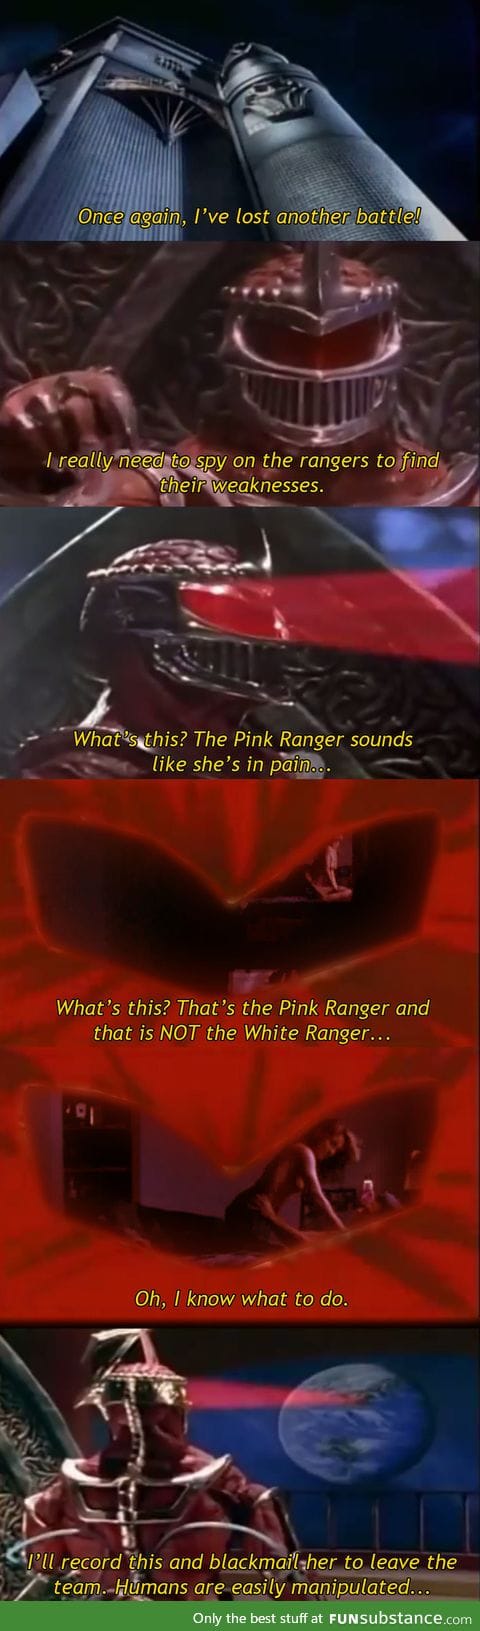 Why the Pink Ranger left the team